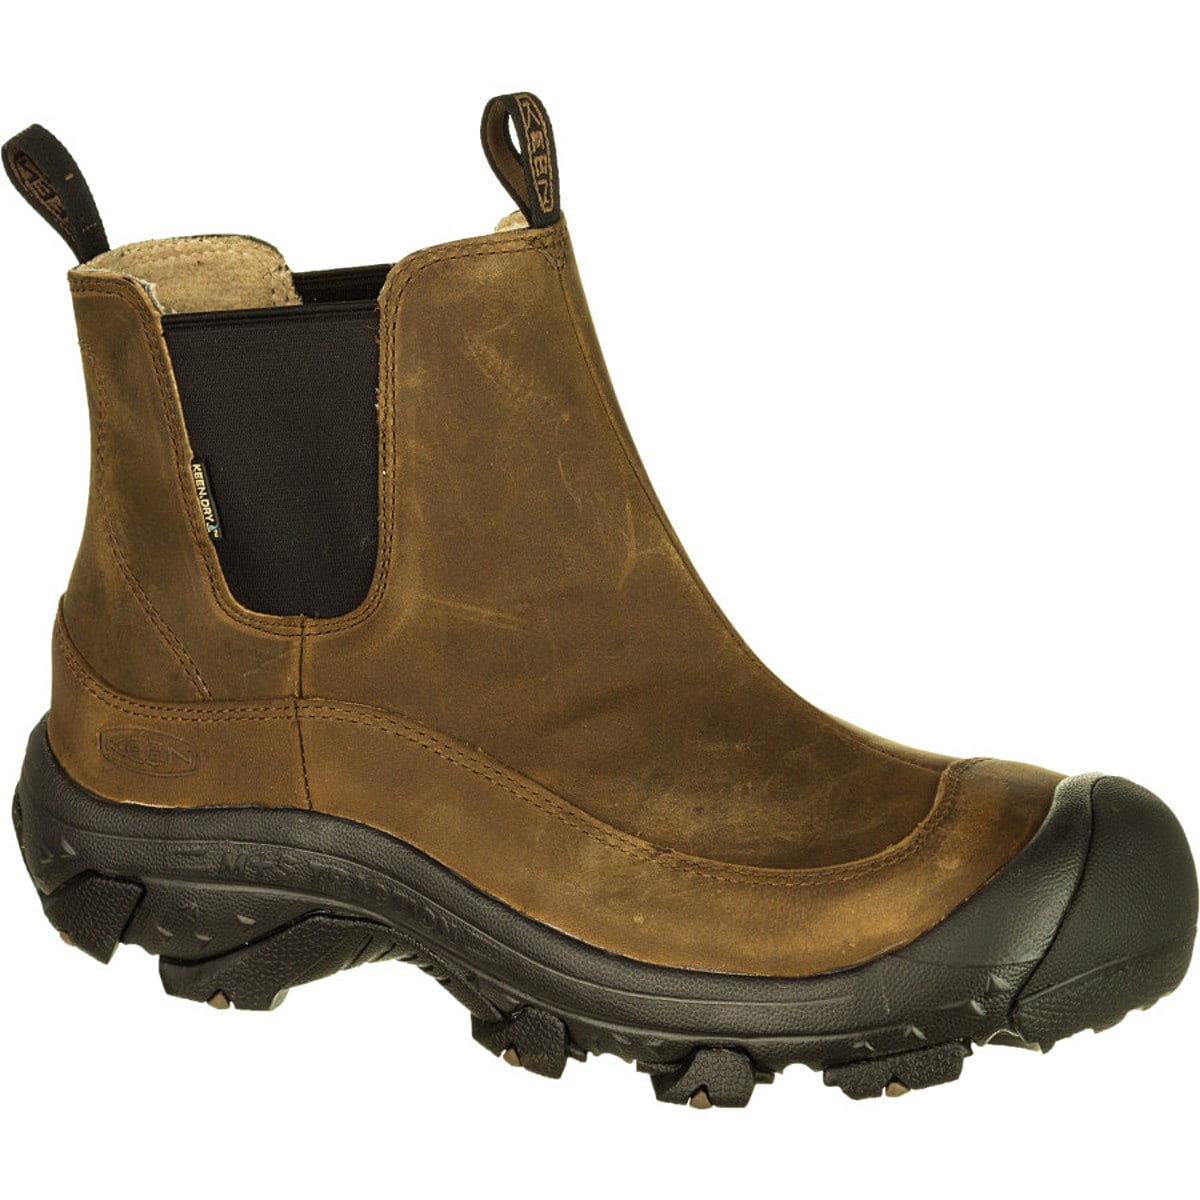 Keen Anchorage Boot - Trailspace.com